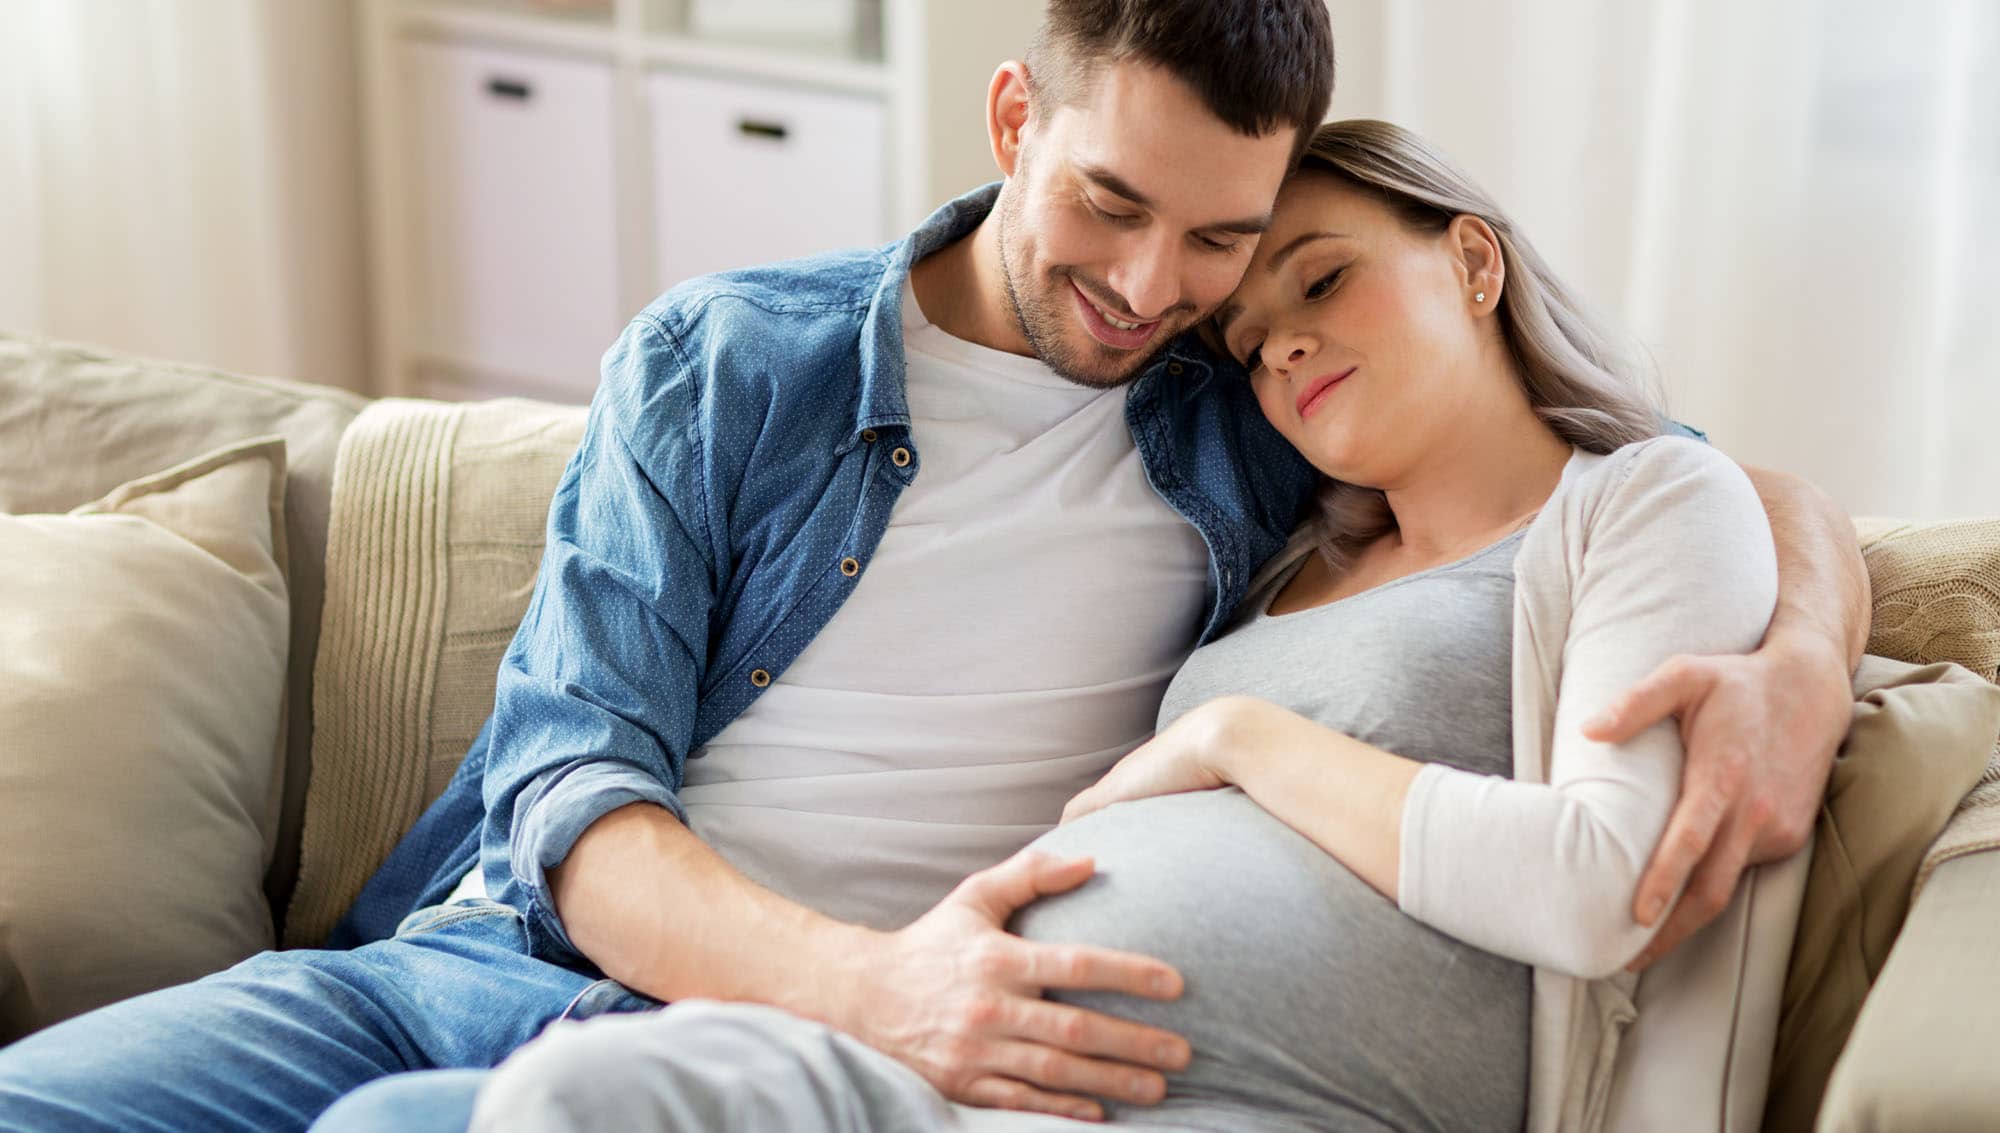 mom news daily - Managing Loneliness As A Pregnant Or New Mom